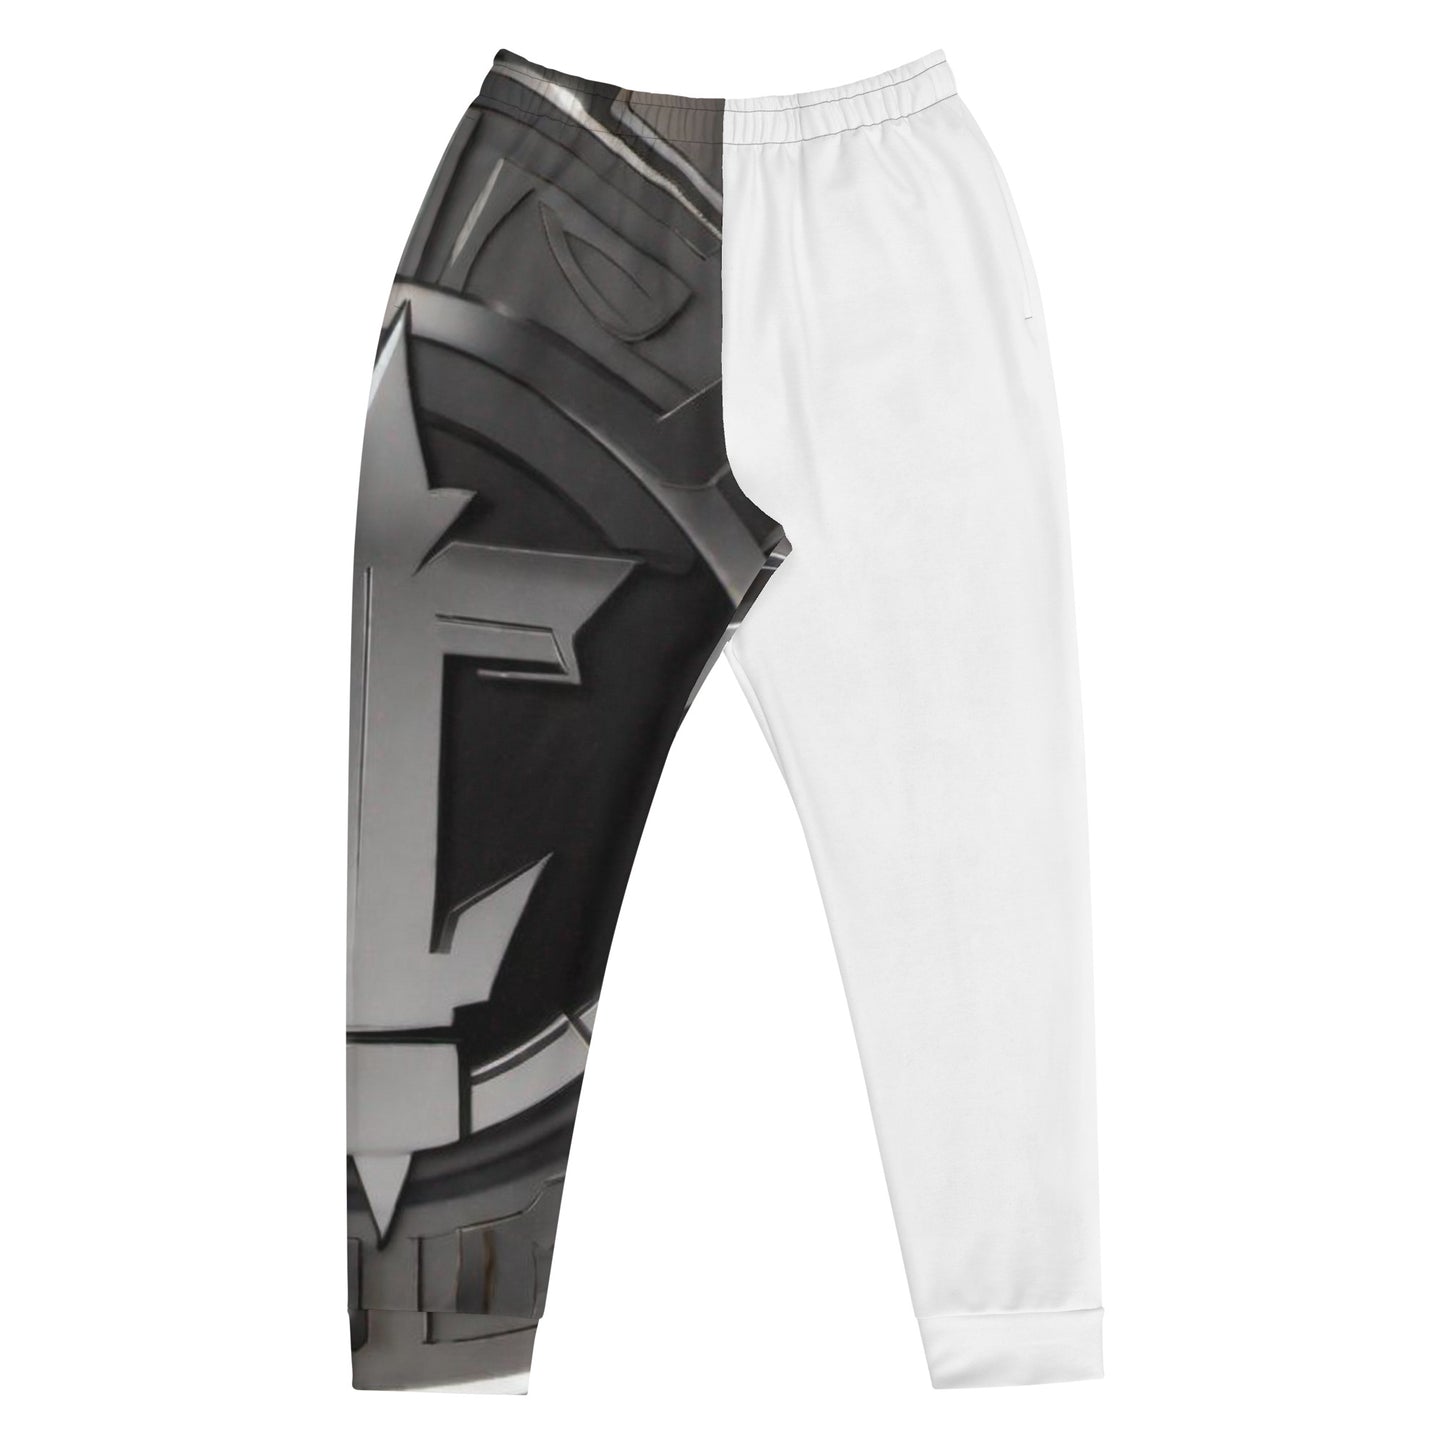 Rich and Rich Men's Joggers